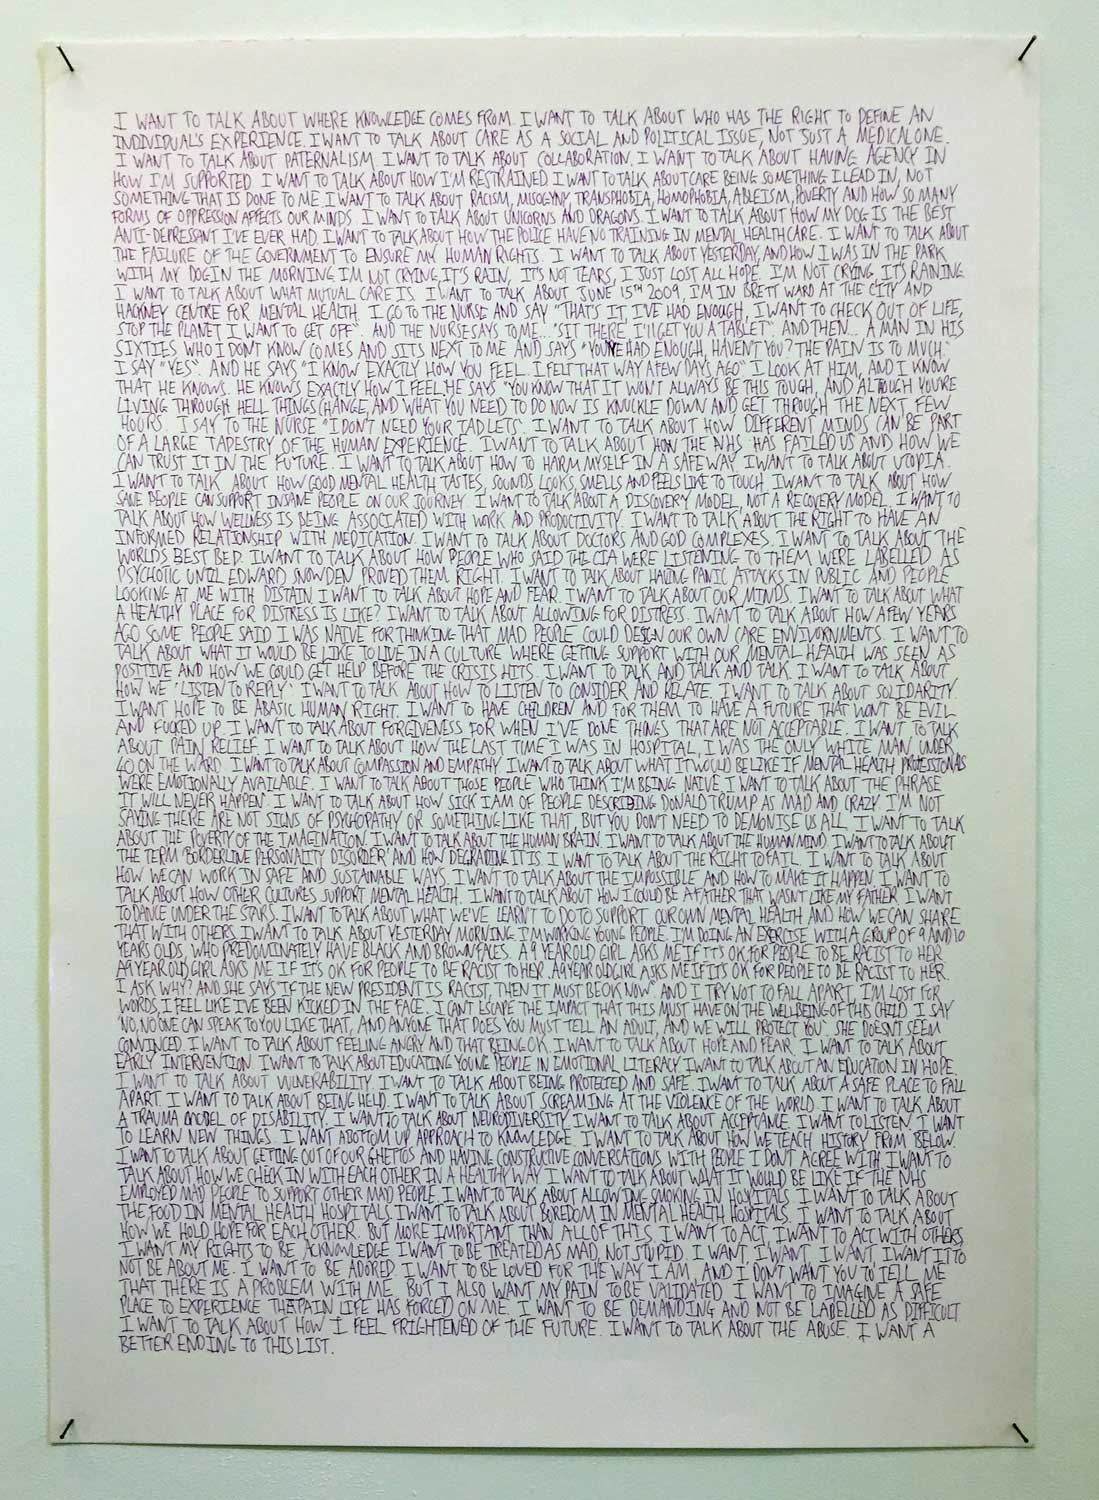 a piece of writing, hand written in capitals, pinned to the wall